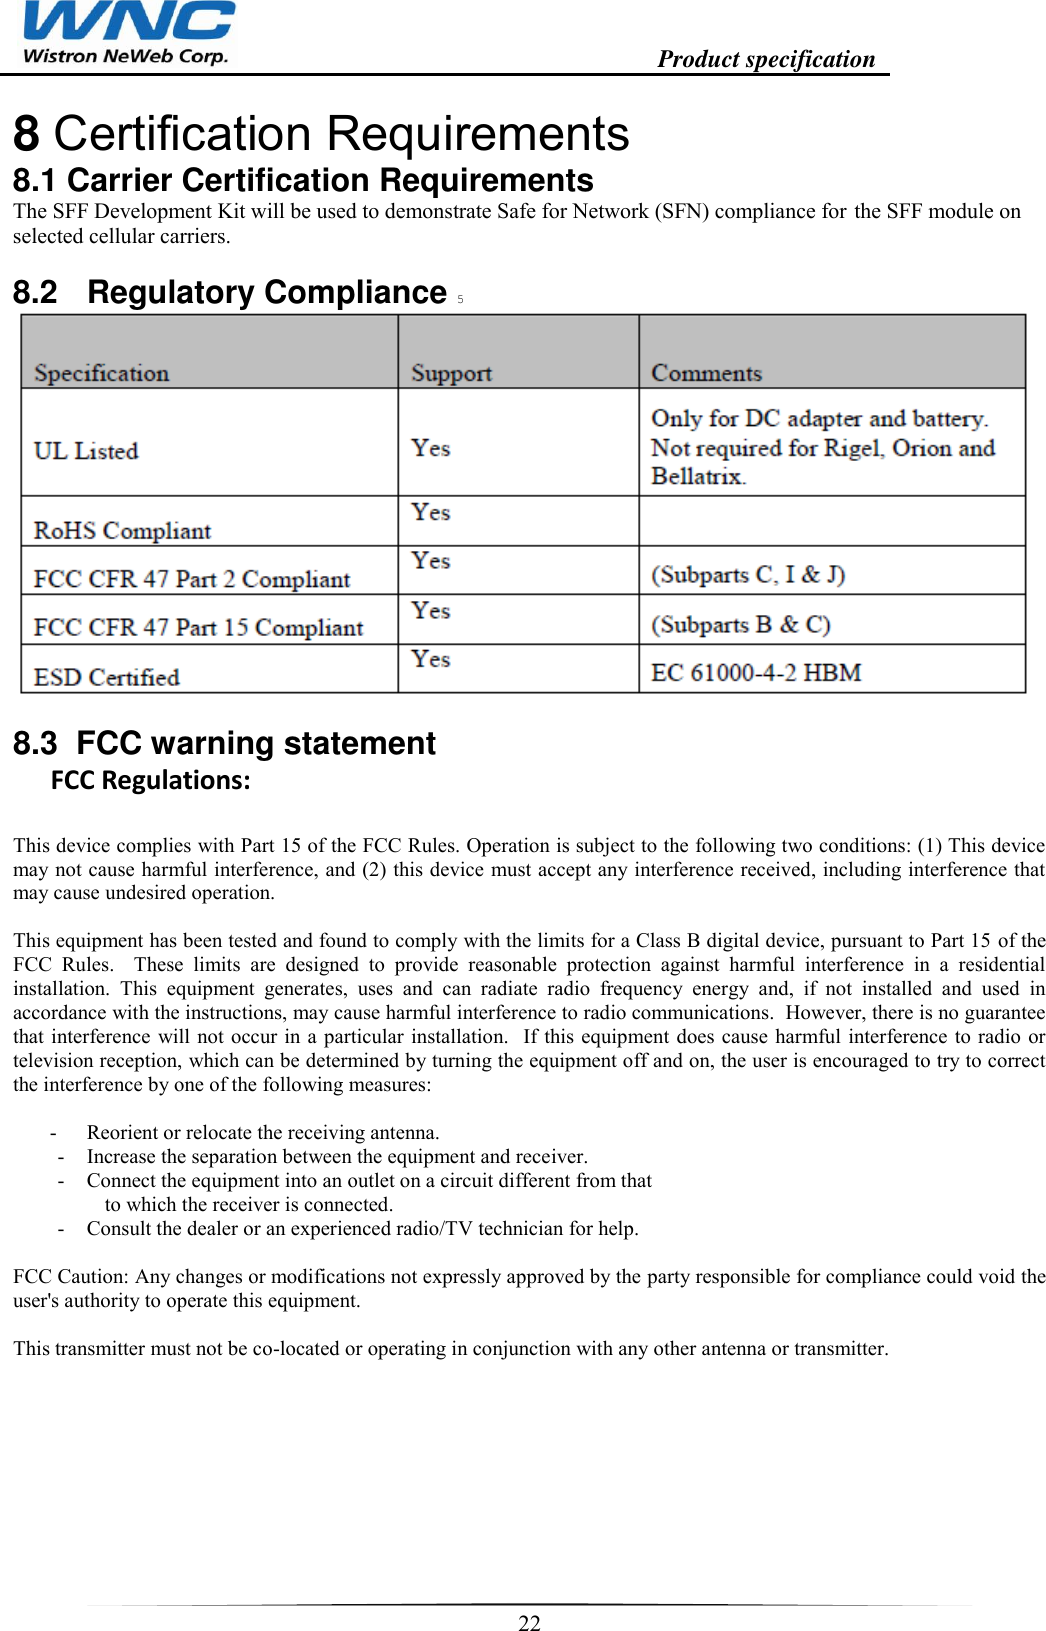                                                                    Product specification    22  8 Certification Requirements  8.1 Carrier Certification Requirements  The SFF Development Kit will be used to demonstrate Safe for Network (SFN) compliance for the SFF module on selected cellular carriers.  8.2  Regulatory Compliance 5    8.3  FCC warning statement FCC Regulations:  This device complies with Part 15 of the FCC Rules. Operation is subject to the following two conditions: (1) This device may not cause harmful interference, and (2) this device must accept any interference received, including interference that may cause undesired operation.  This equipment has been tested and found to comply with the limits for a Class B digital device, pursuant to Part 15 of the FCC  Rules.    These  limits  are  designed  to  provide  reasonable  protection  against  harmful  interference  in  a  residential installation.  This  equipment  generates,  uses  and  can  radiate  radio  frequency  energy  and,  if  not  installed  and  used  in accordance with the instructions, may cause harmful interference to radio communications.  However, there is no guarantee that interference will not occur in a particular installation.  If this equipment does cause harmful interference to radio or television reception, which can be determined by turning the equipment off and on, the user is encouraged to try to correct the interference by one of the following measures:  -  Reorient or relocate the receiving antenna. -  Increase the separation between the equipment and receiver. -  Connect the equipment into an outlet on a circuit different from that to which the receiver is connected. -  Consult the dealer or an experienced radio/TV technician for help.  FCC Caution: Any changes or modifications not expressly approved by the party responsible for compliance could void the user&apos;s authority to operate this equipment.  This transmitter must not be co-located or operating in conjunction with any other antenna or transmitter.          